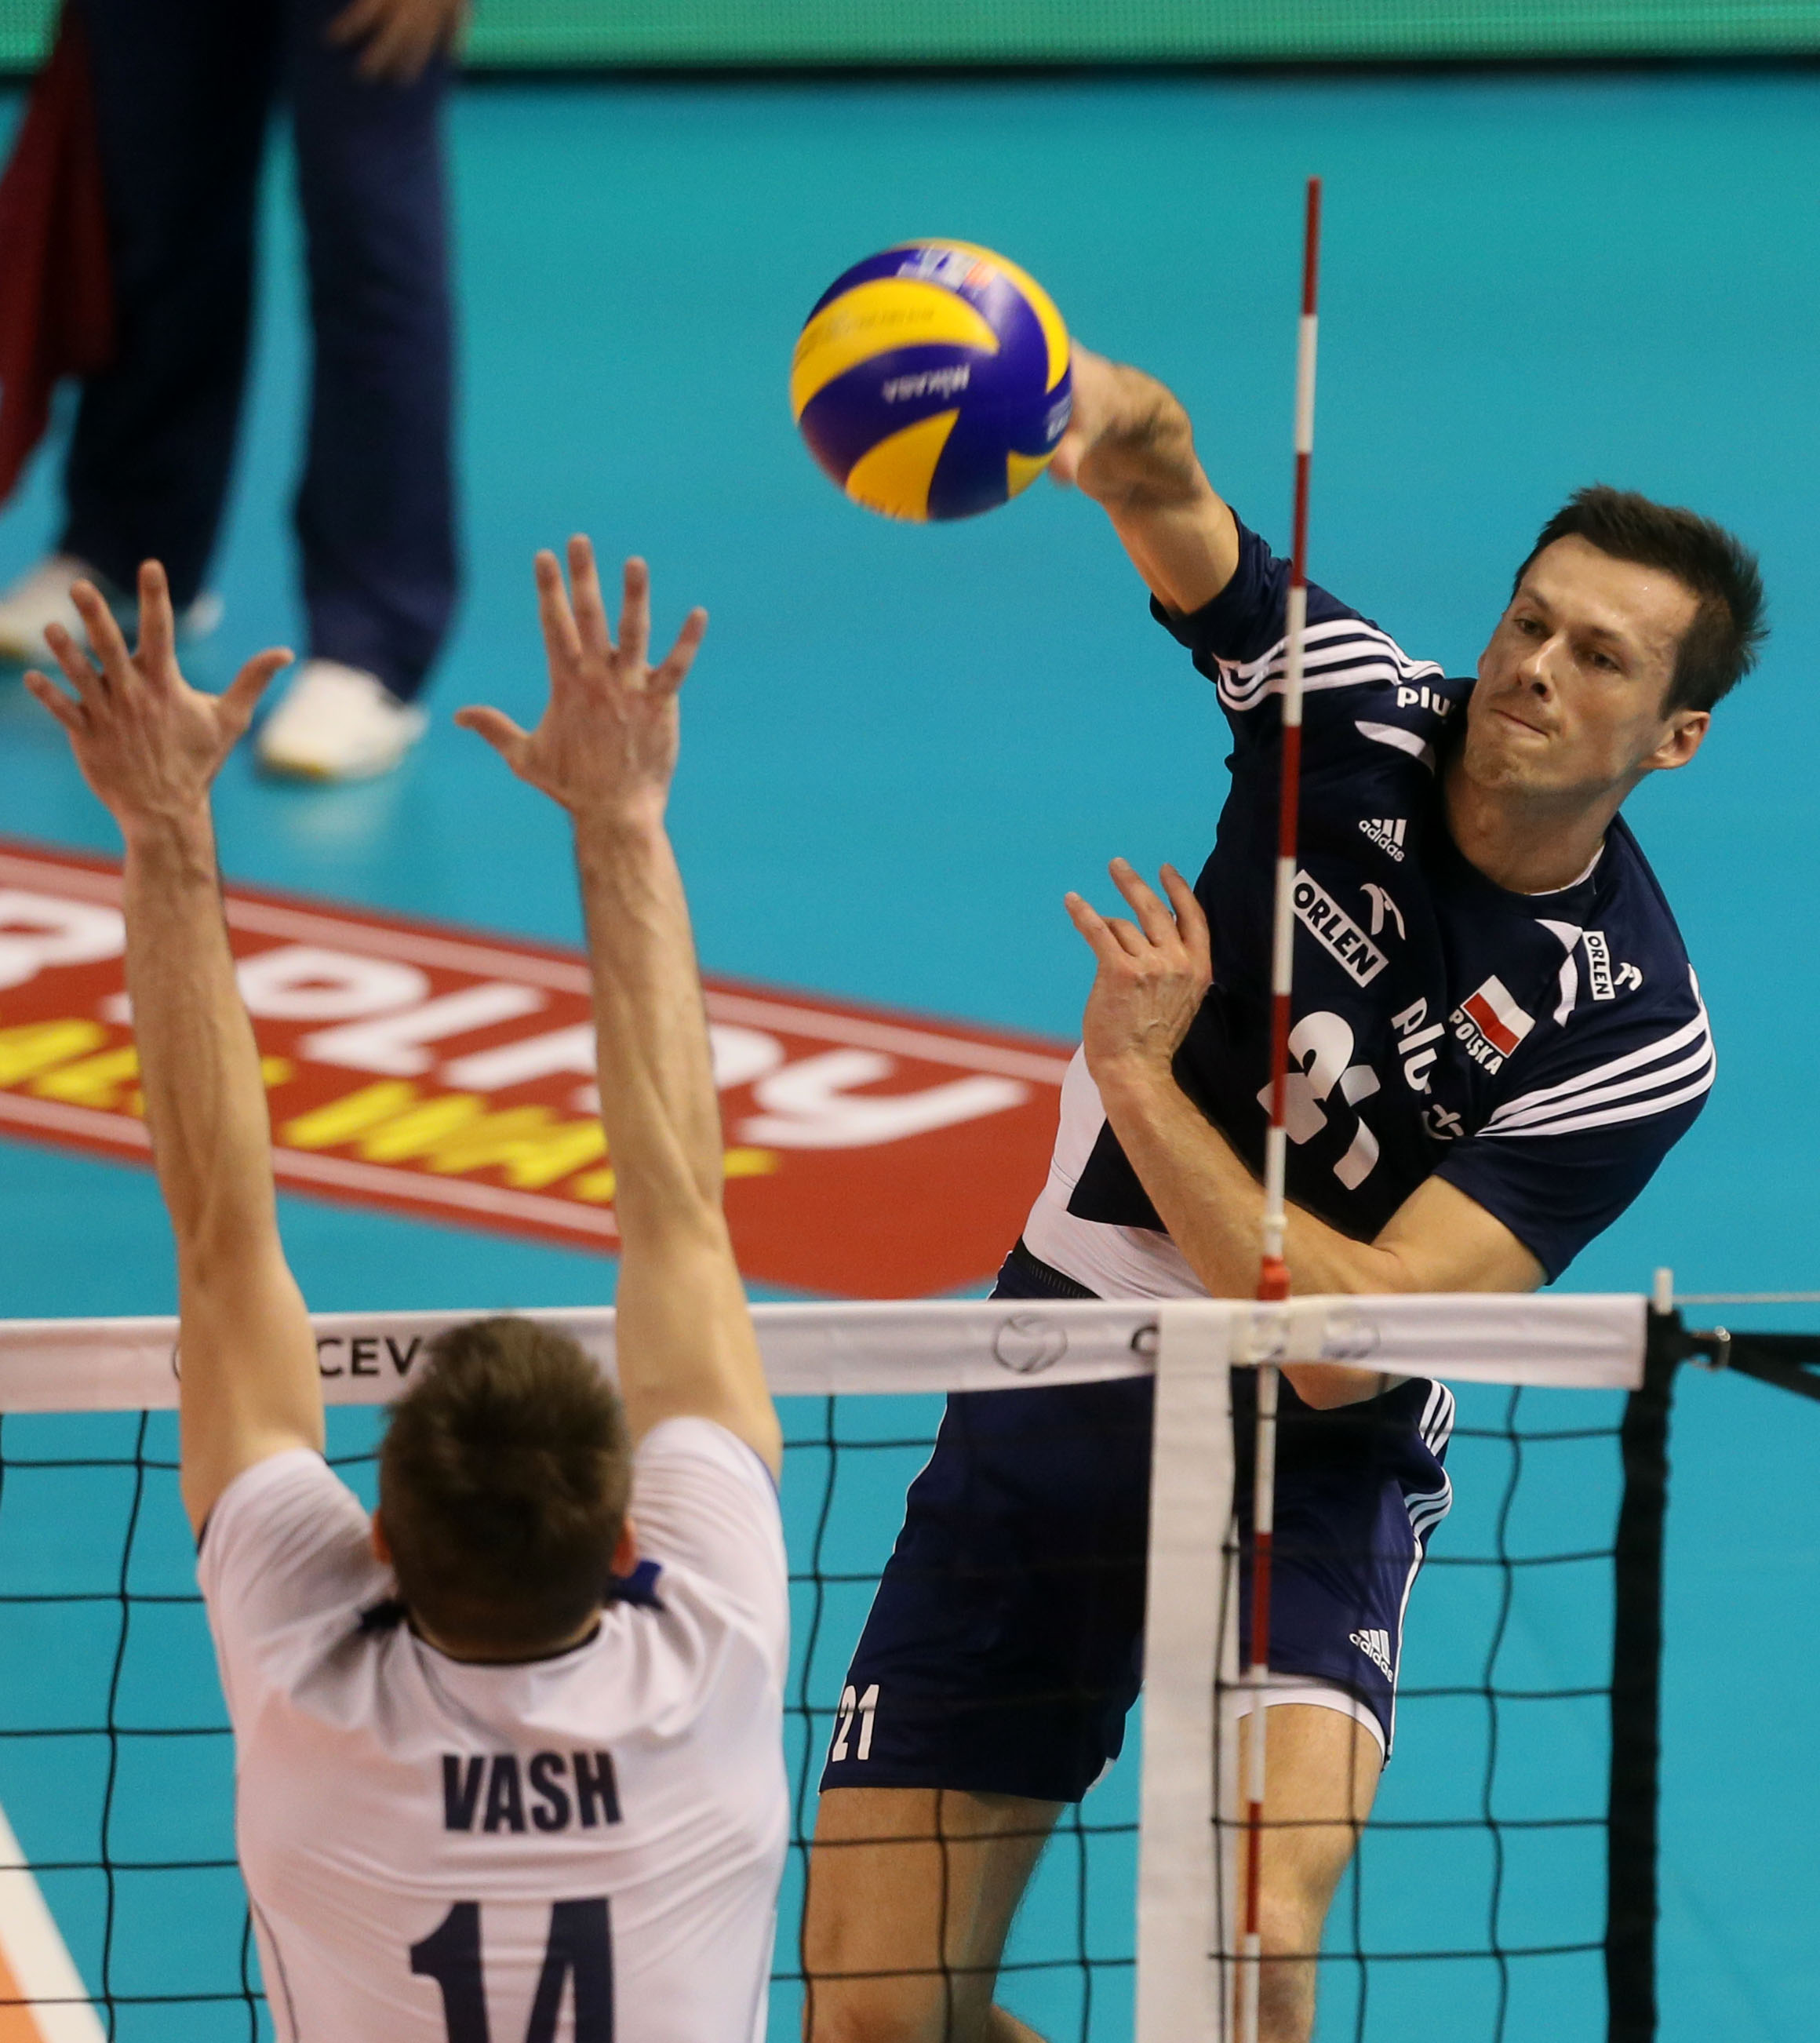 Euro Volley 2015 CEV Men’s European Championship Pictures 3 – Volleywood